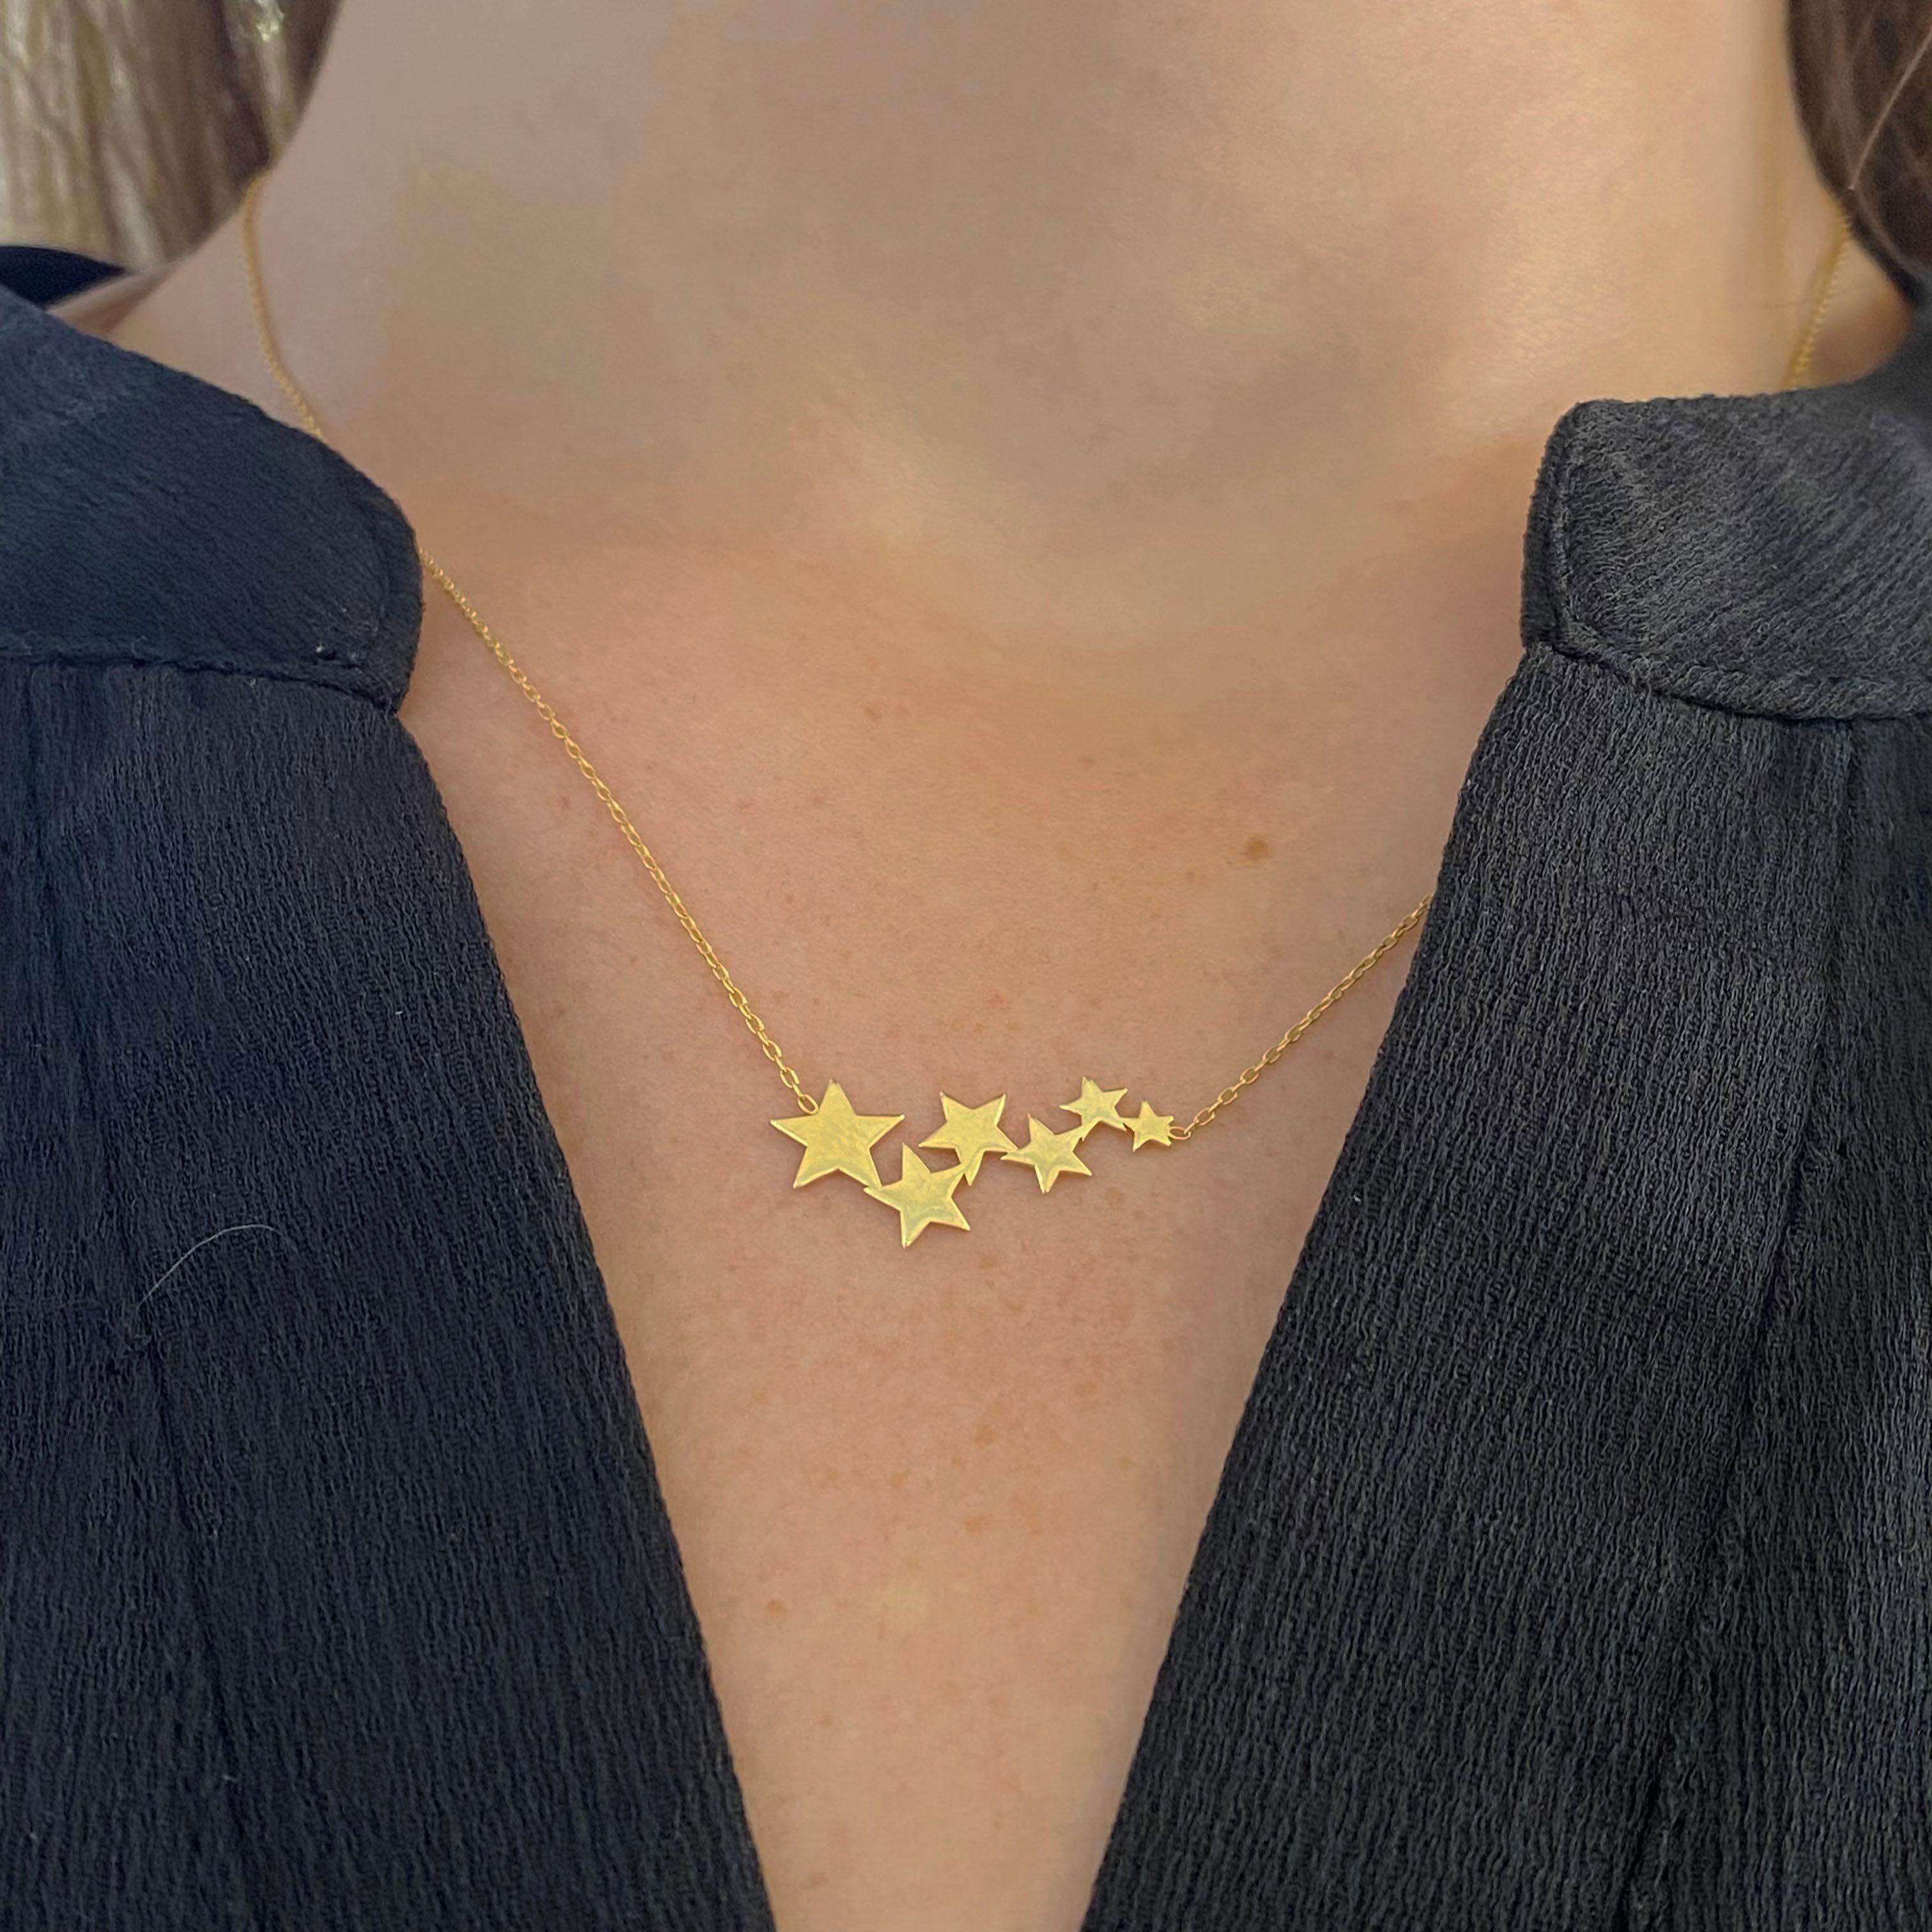 Star Cluster Necklace w 6 Stars in 14K Yellow Gold w Adjustable Chain In New Condition For Sale In Austin, TX